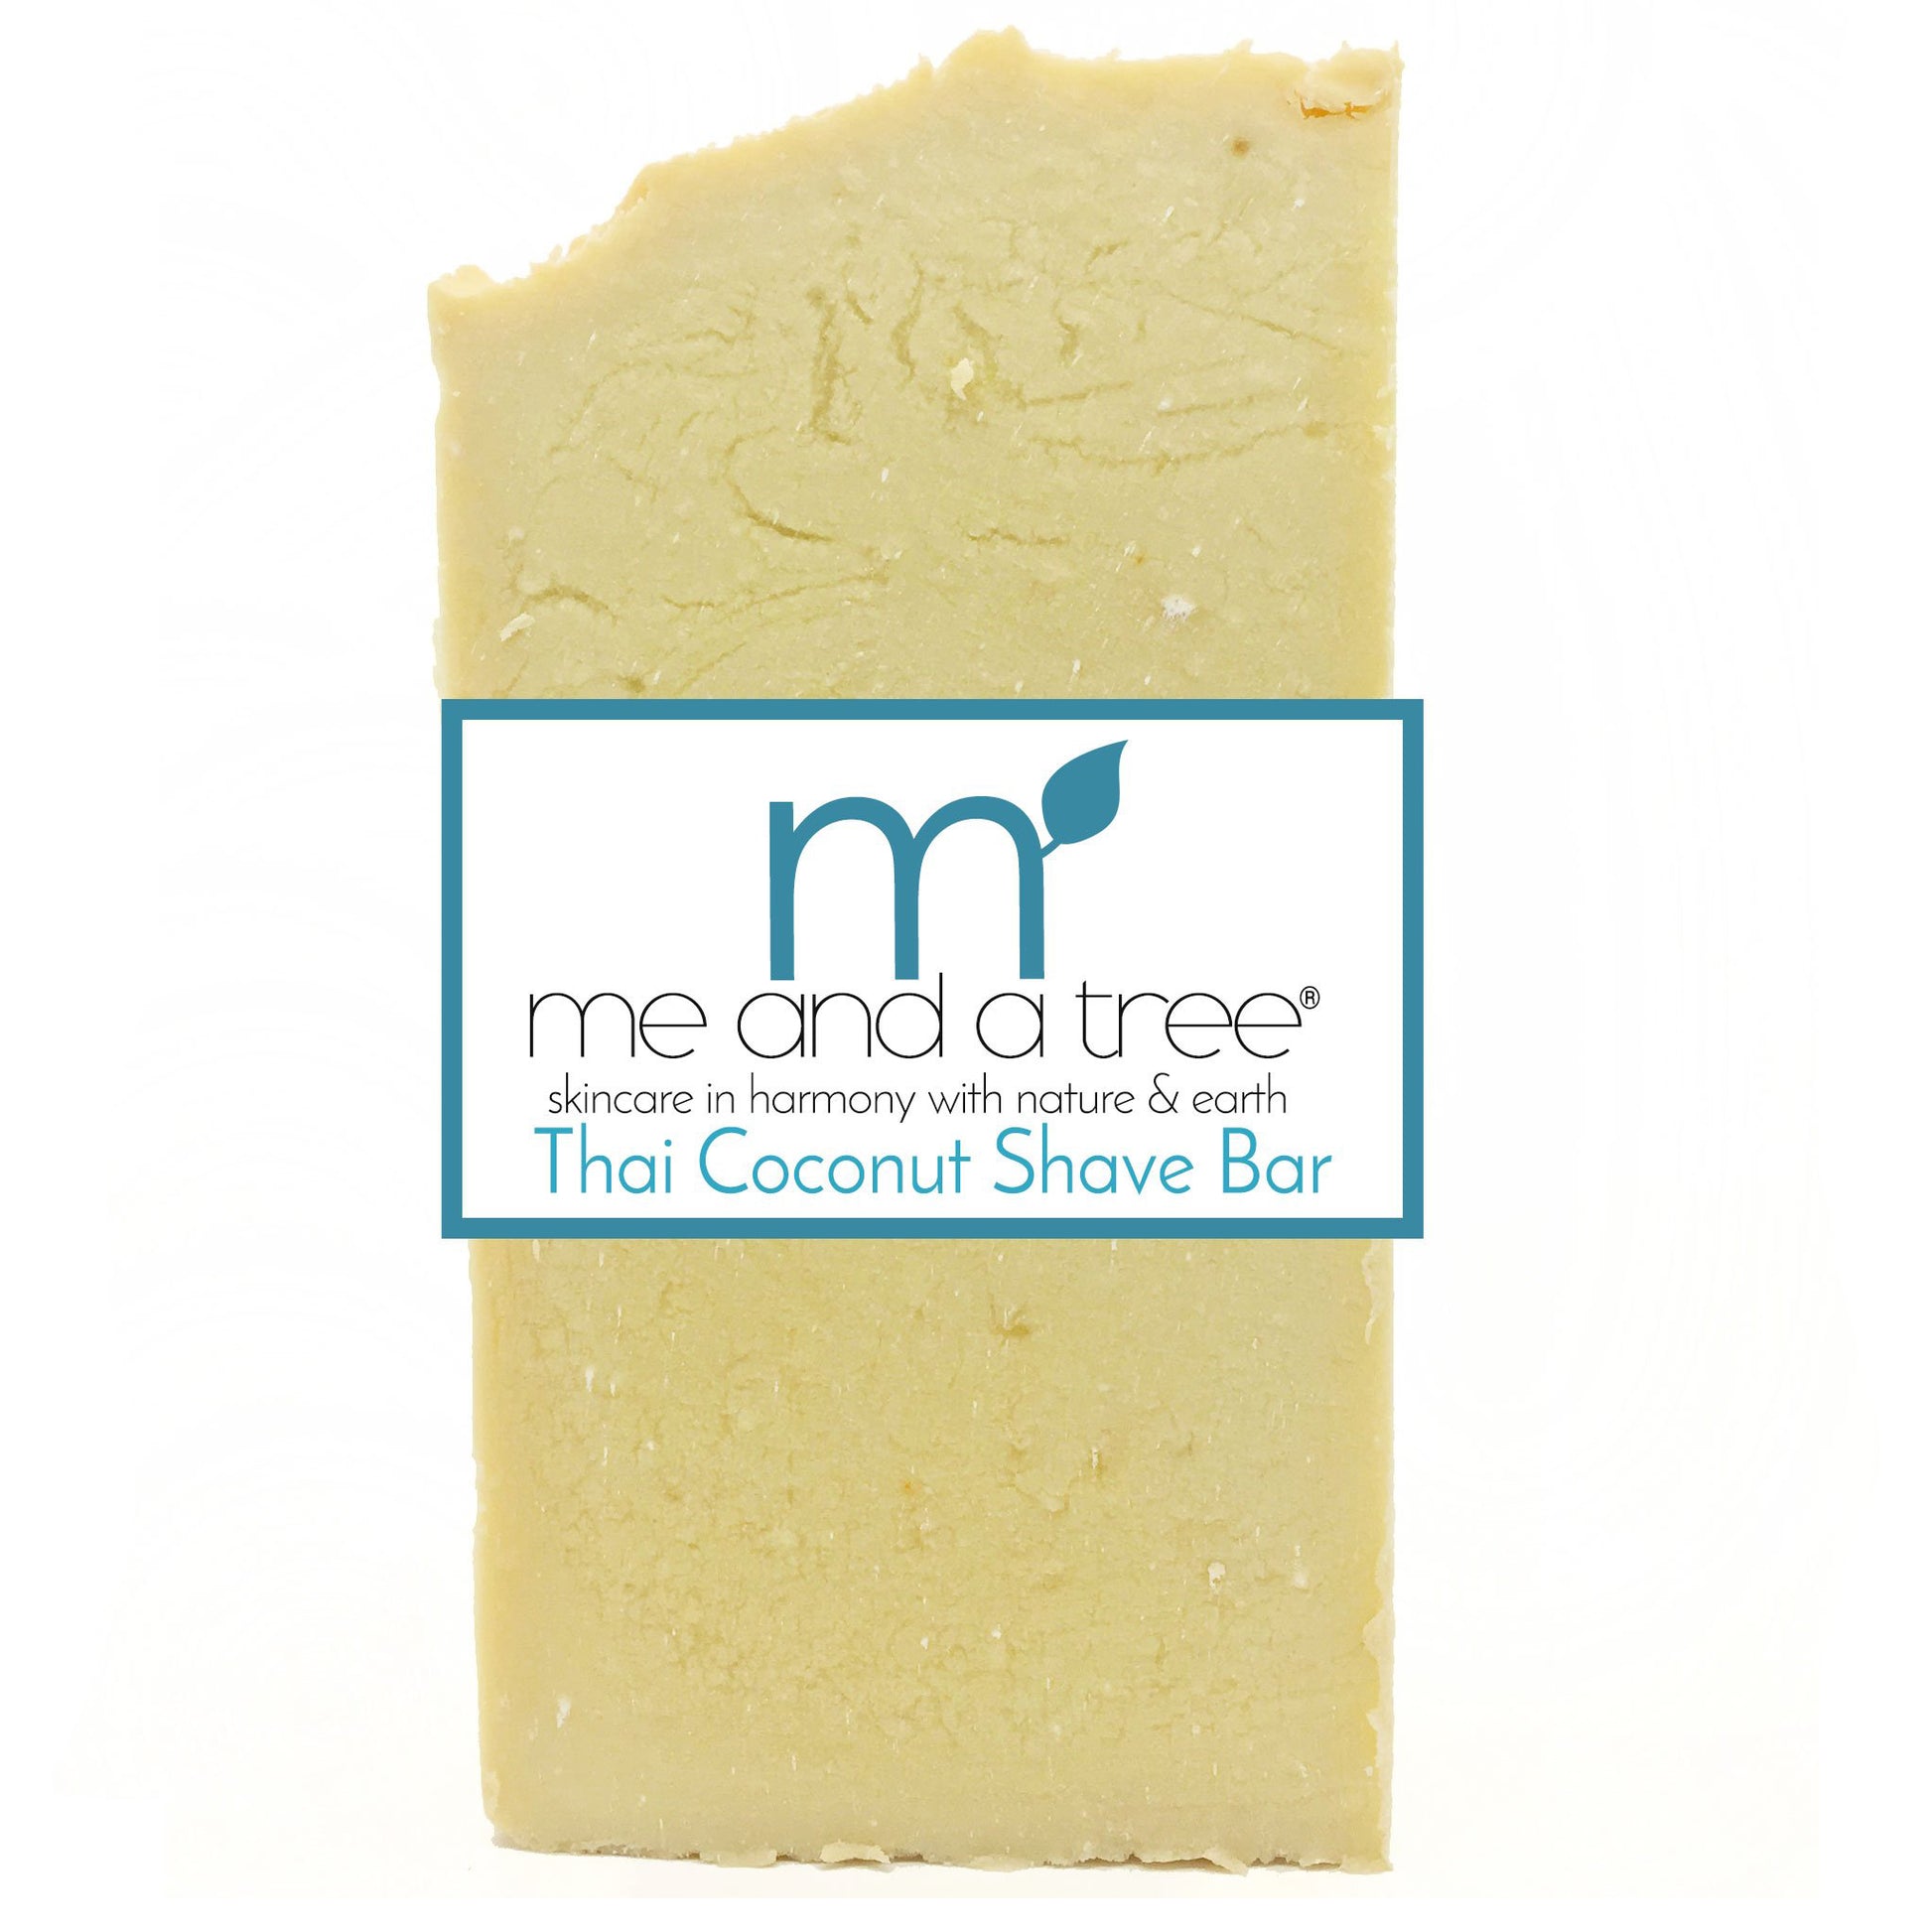 Best Thai Coconut Bar Soap - All-in-one shave bar & body wash made with organic coconut oil, olive fruit oil, and avocado oil for deep hydration and gentle cleansing. Suitable for all skin types